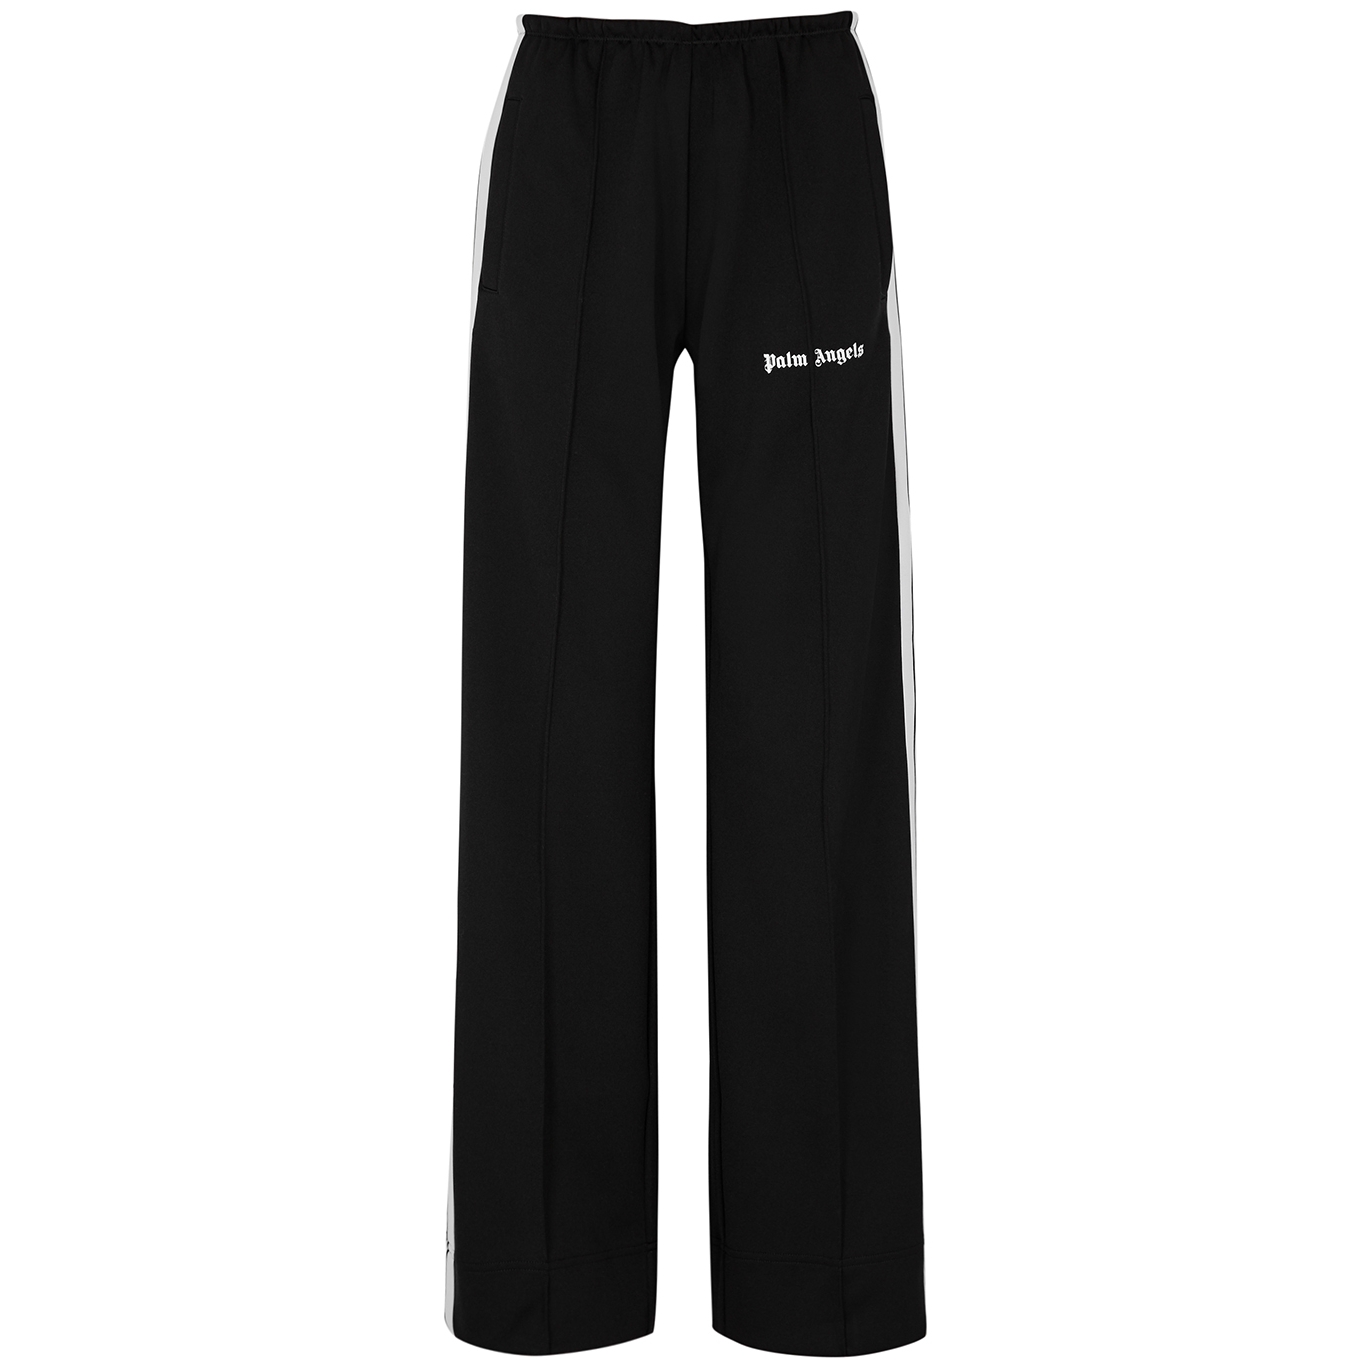 Palm Angels Jersey Track Pants - Black And White - 10